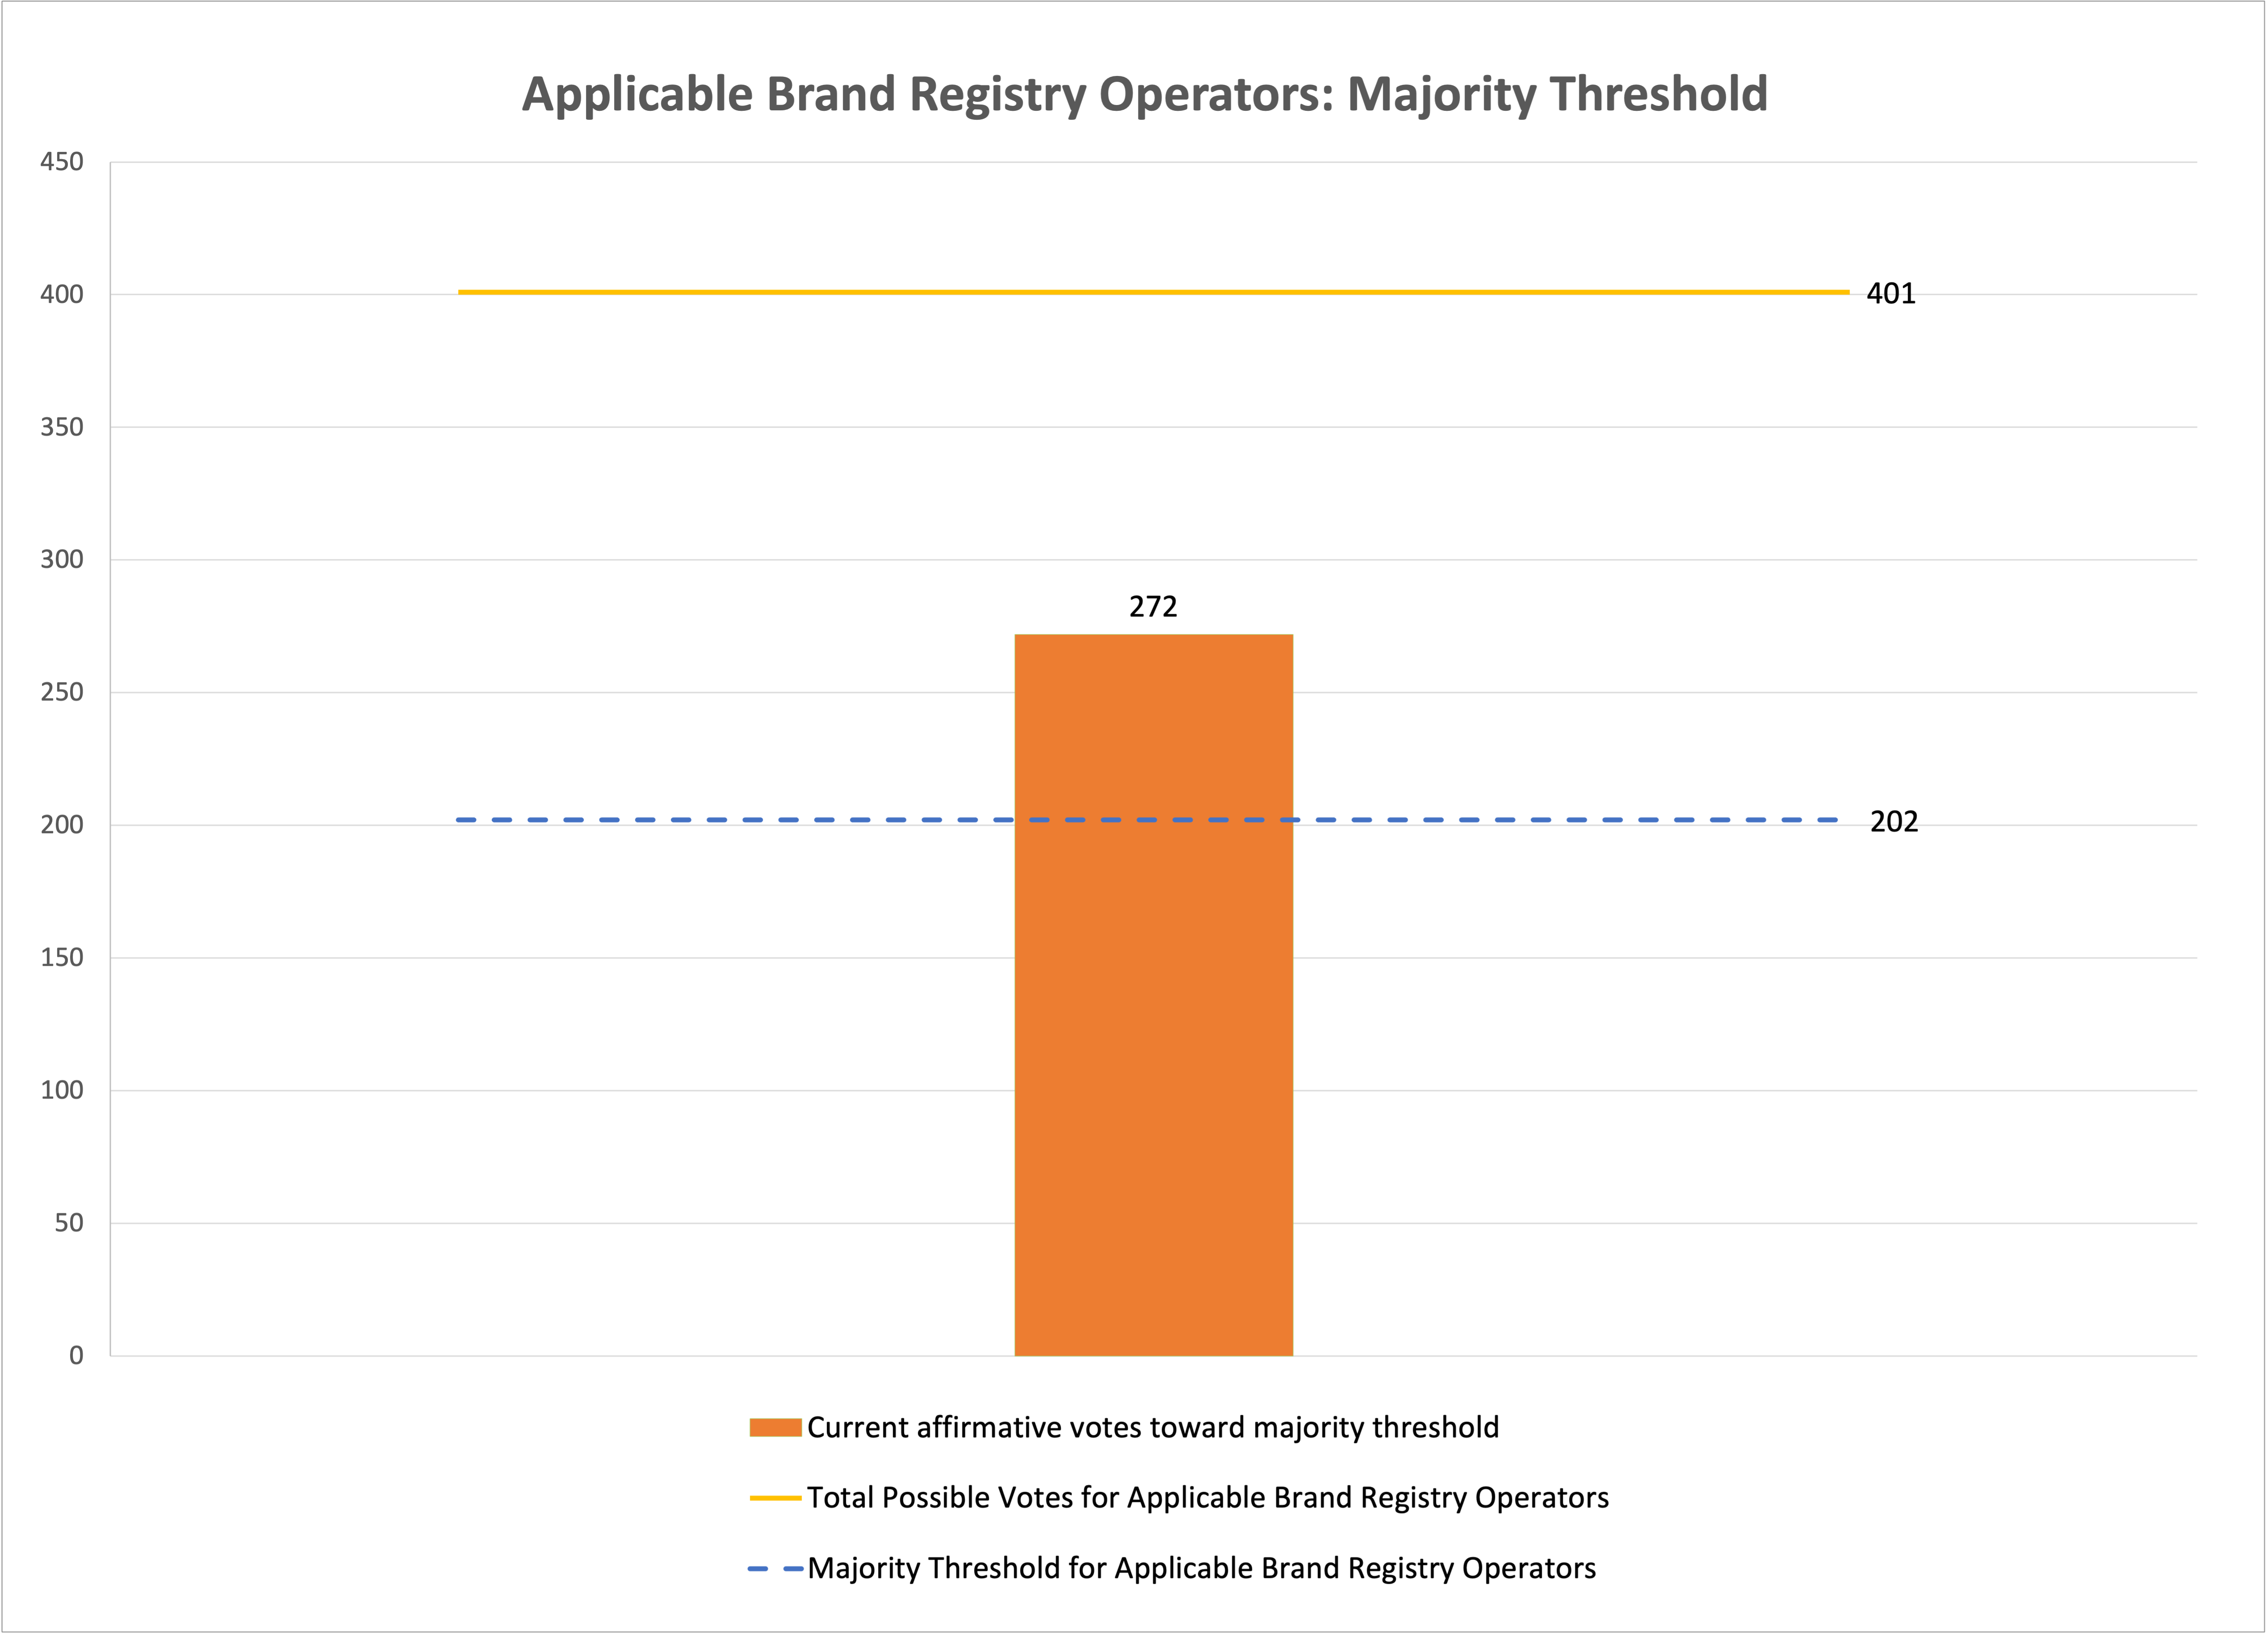 Bar chart of the progress of the vote towards the affirmative approval of the majority threshold for Applicable Brand Registry Operators. Majority approval threshold of 202, with current affirmative votes toward the majority threshold at 272